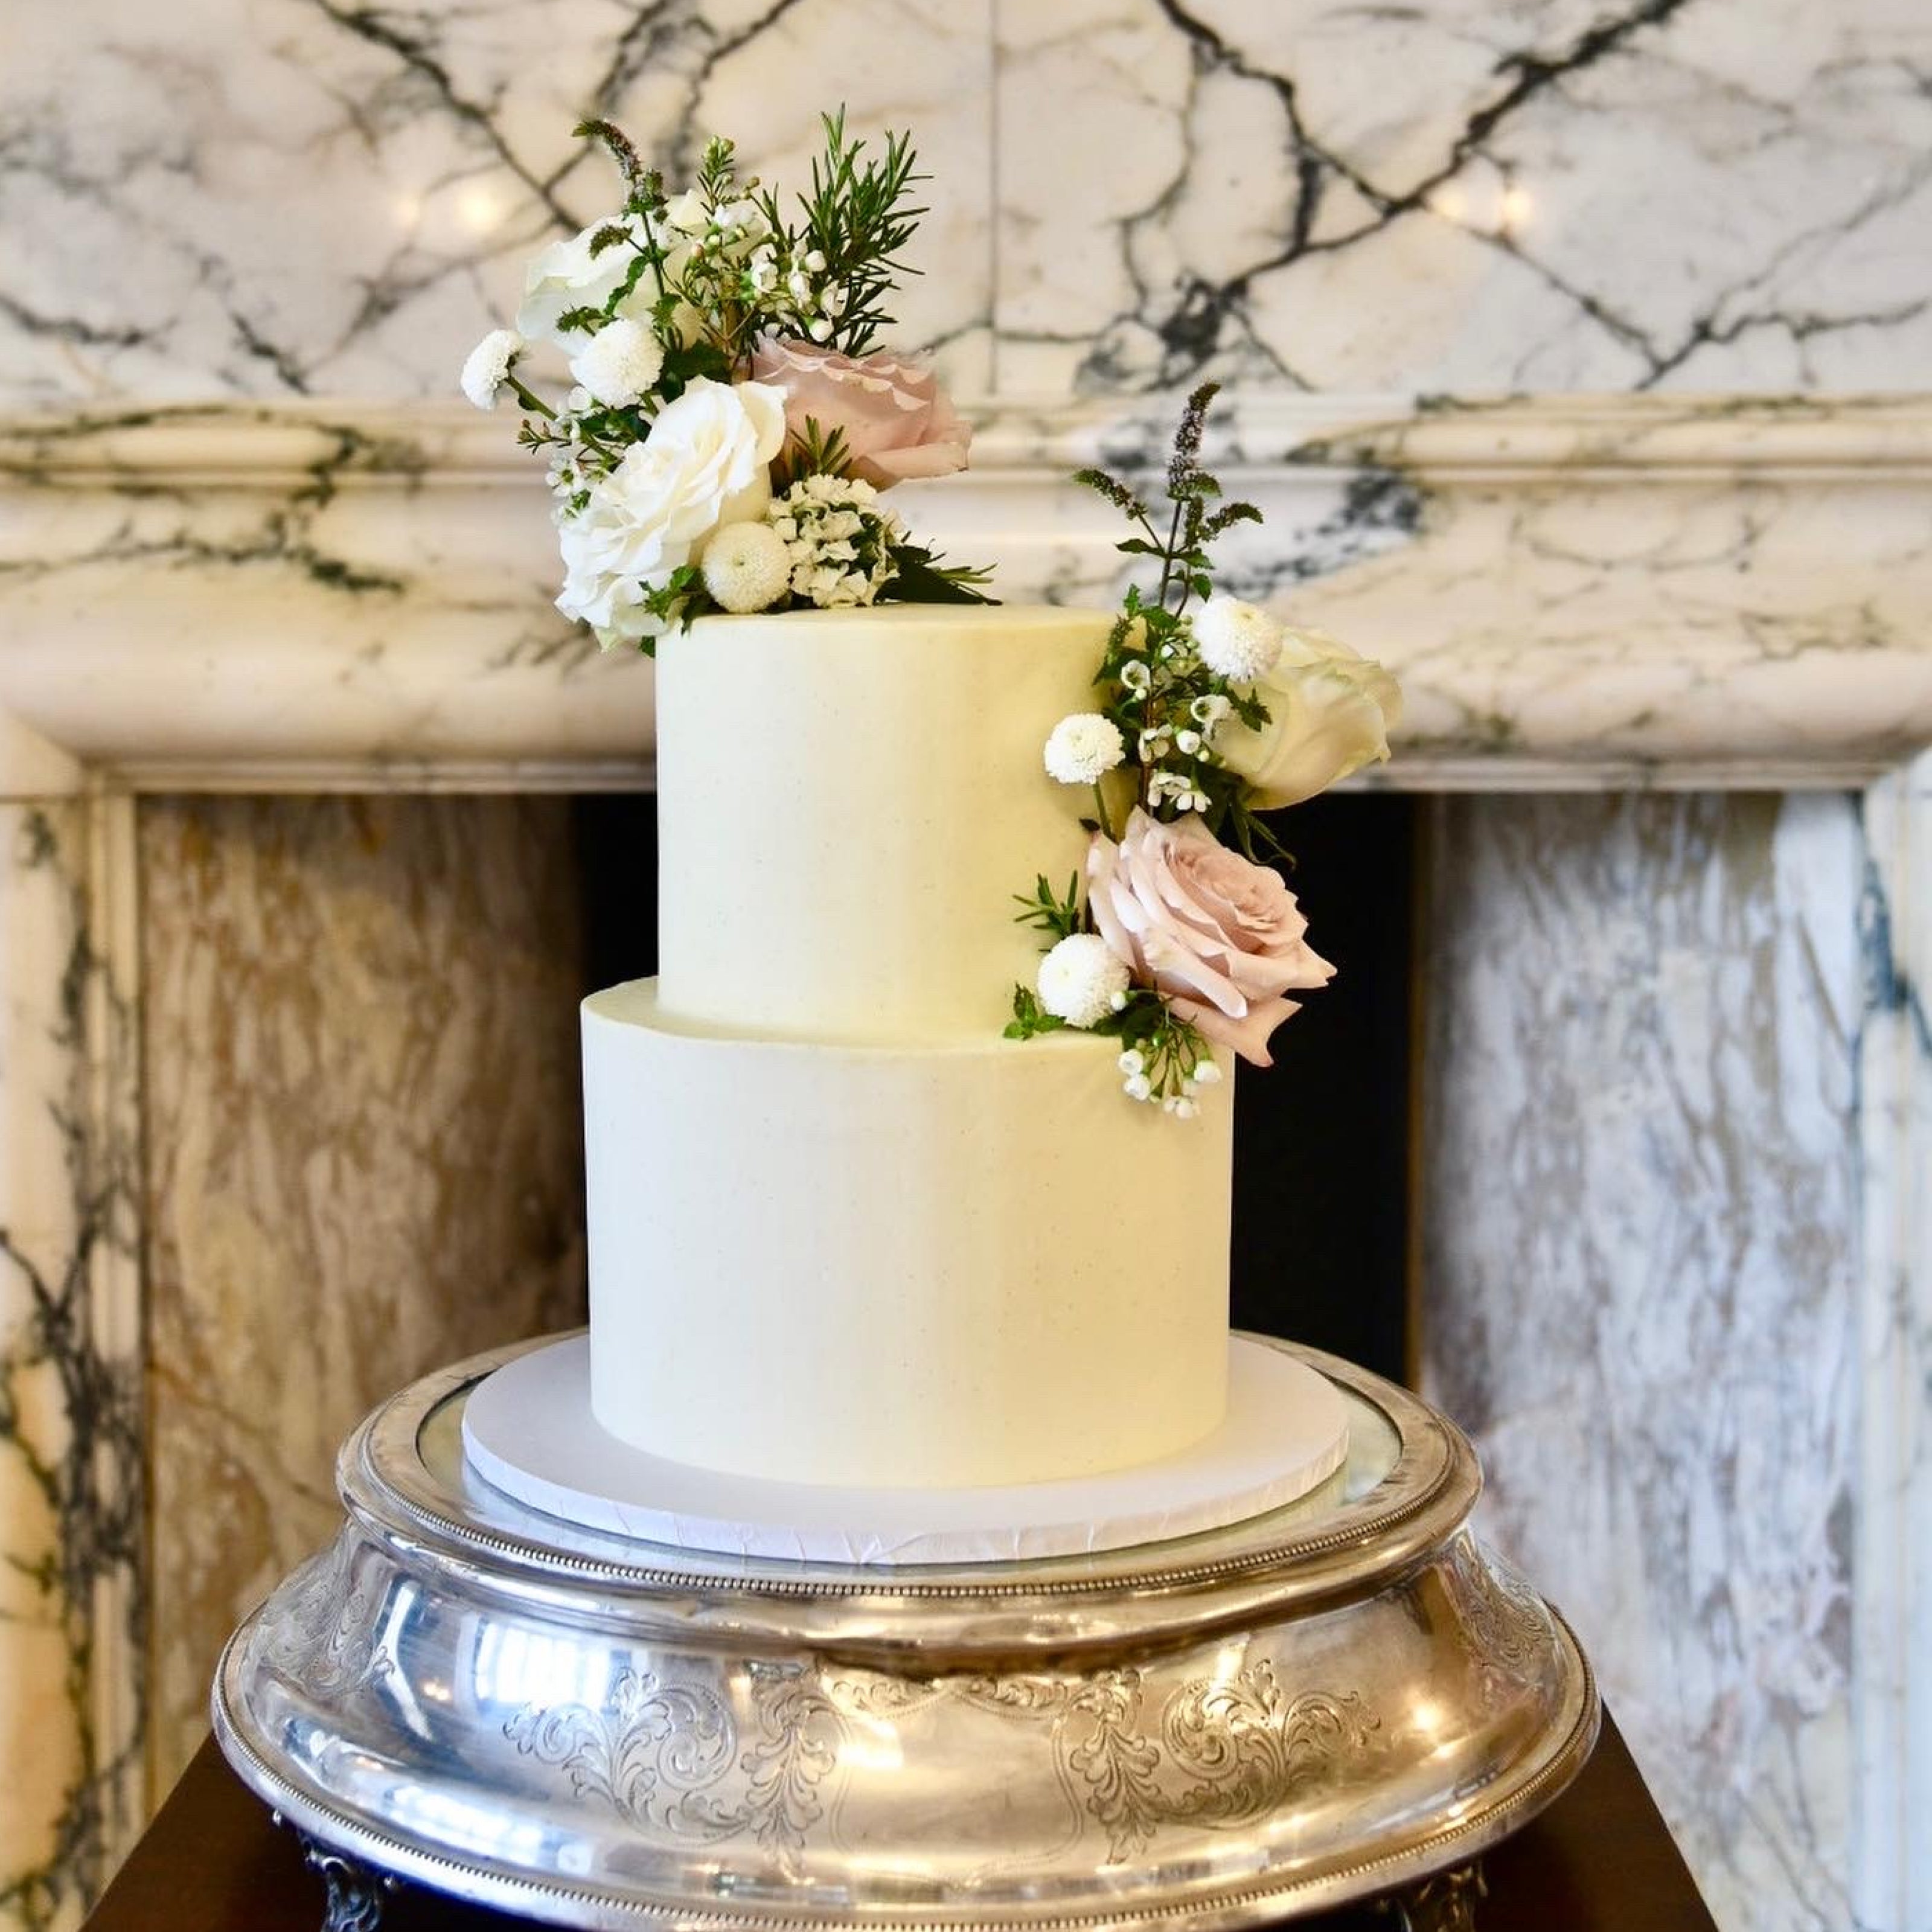 Elegant floral cake sitting on a silver cake stand